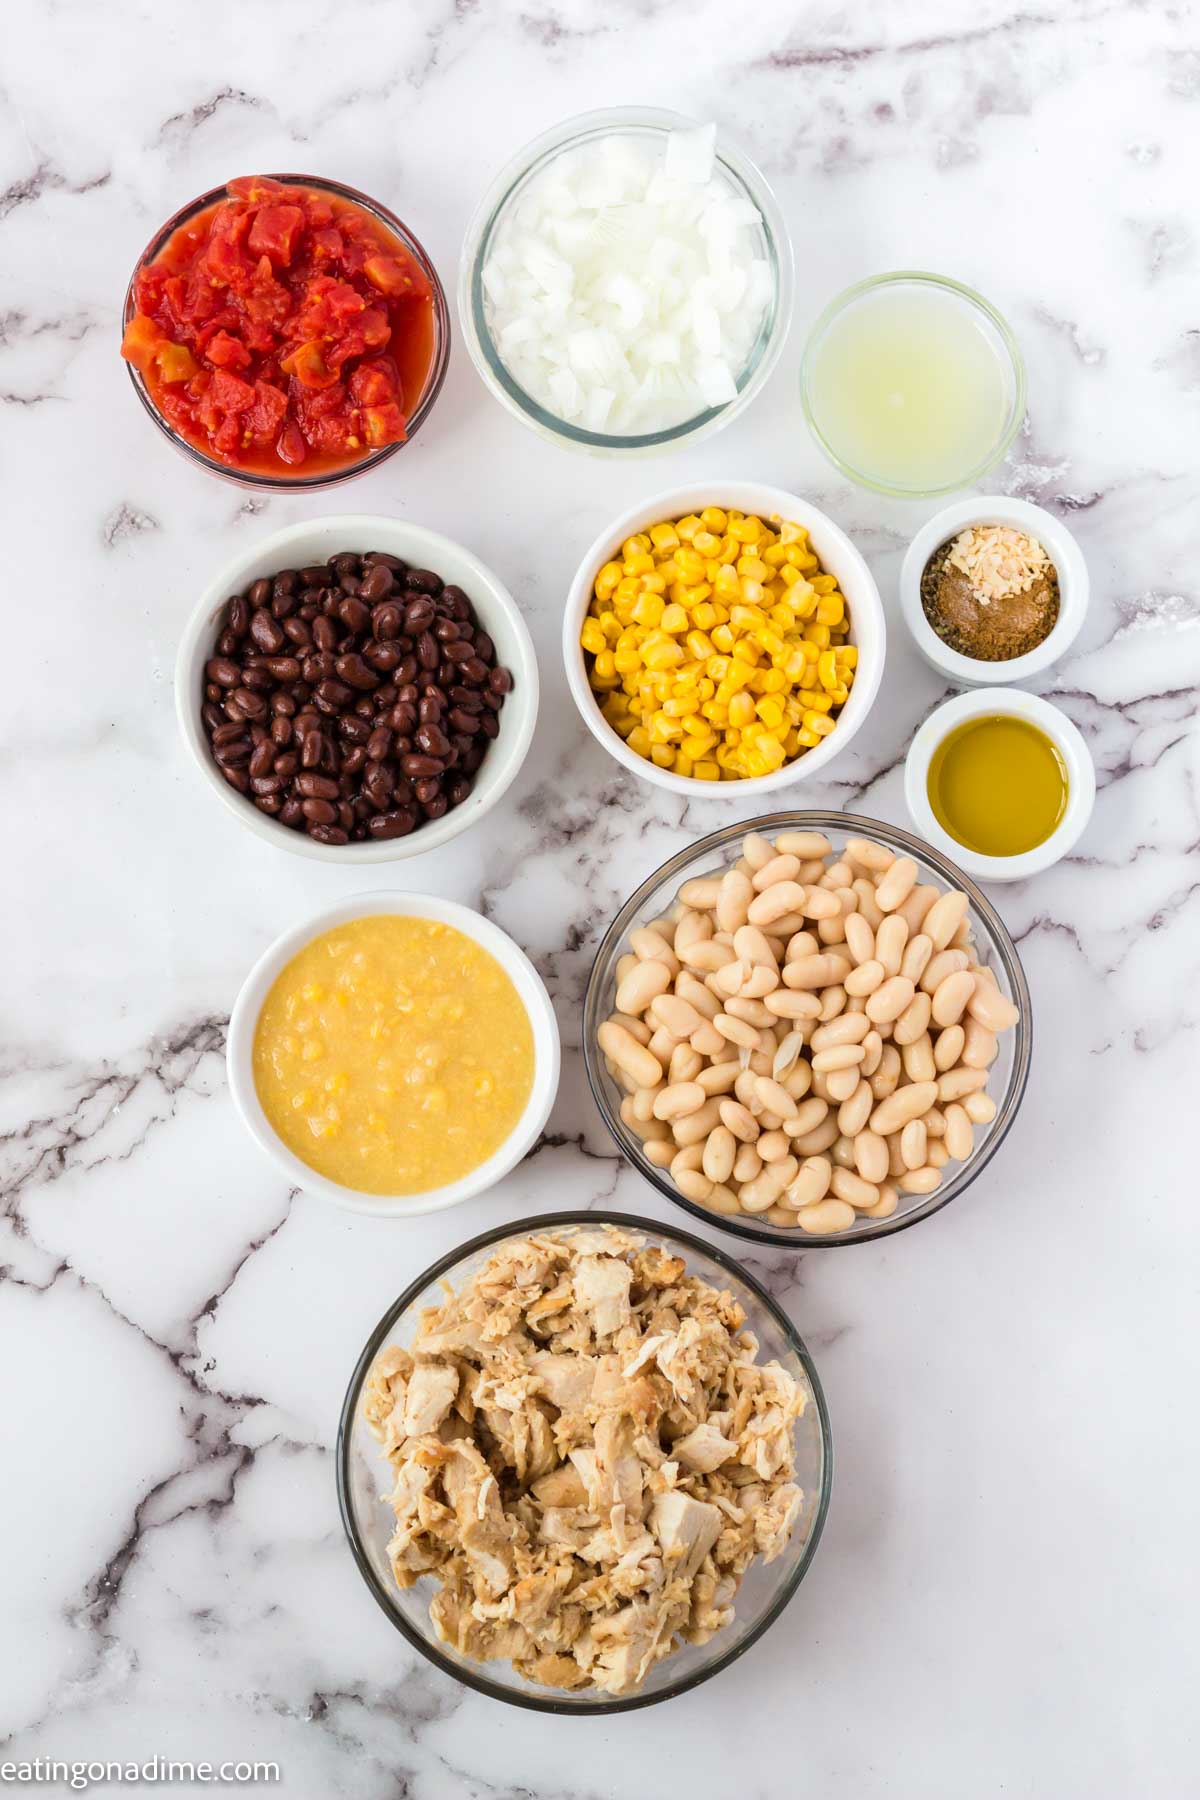 Ingredients needed - olive oil, onion, garlic, cumin, oregano, salt, cannellini beans, diced tomatoes, cream style corn, black beans, cooked chicken, lime